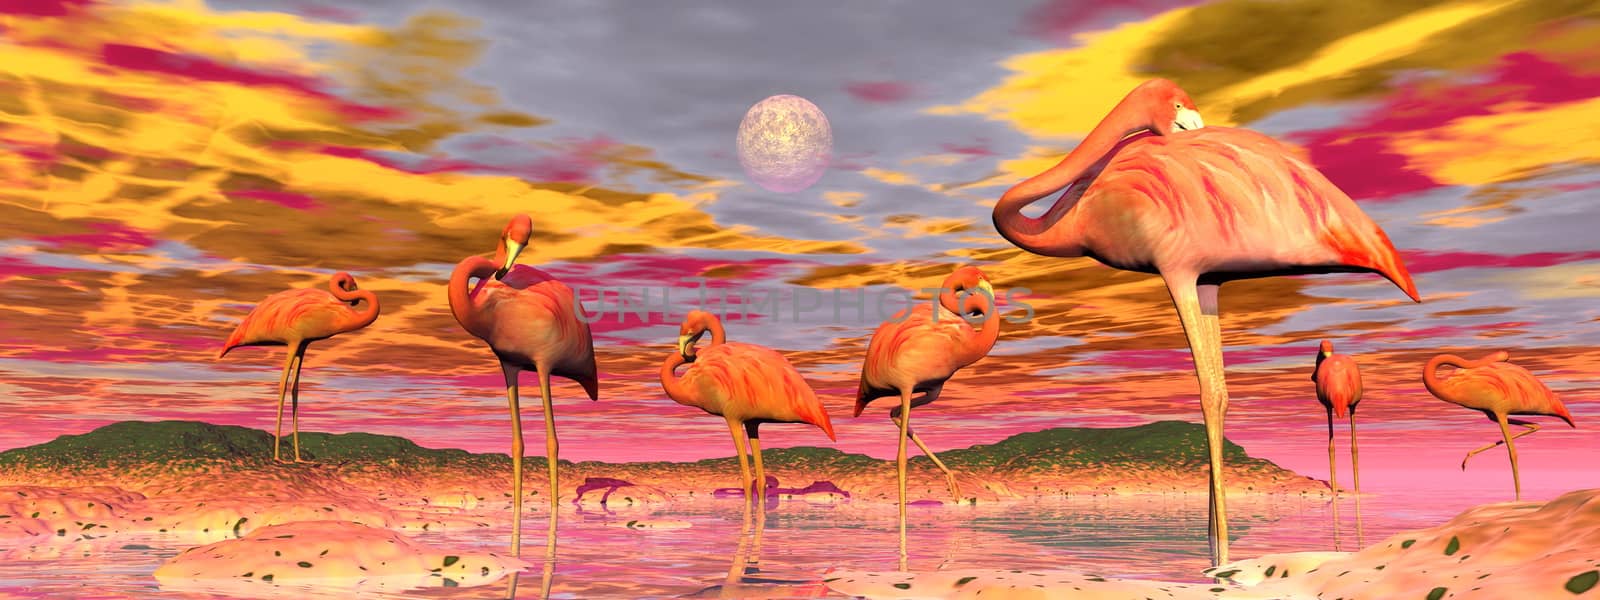 Flock of flamingos standing peacefully in the water by colorful sunset